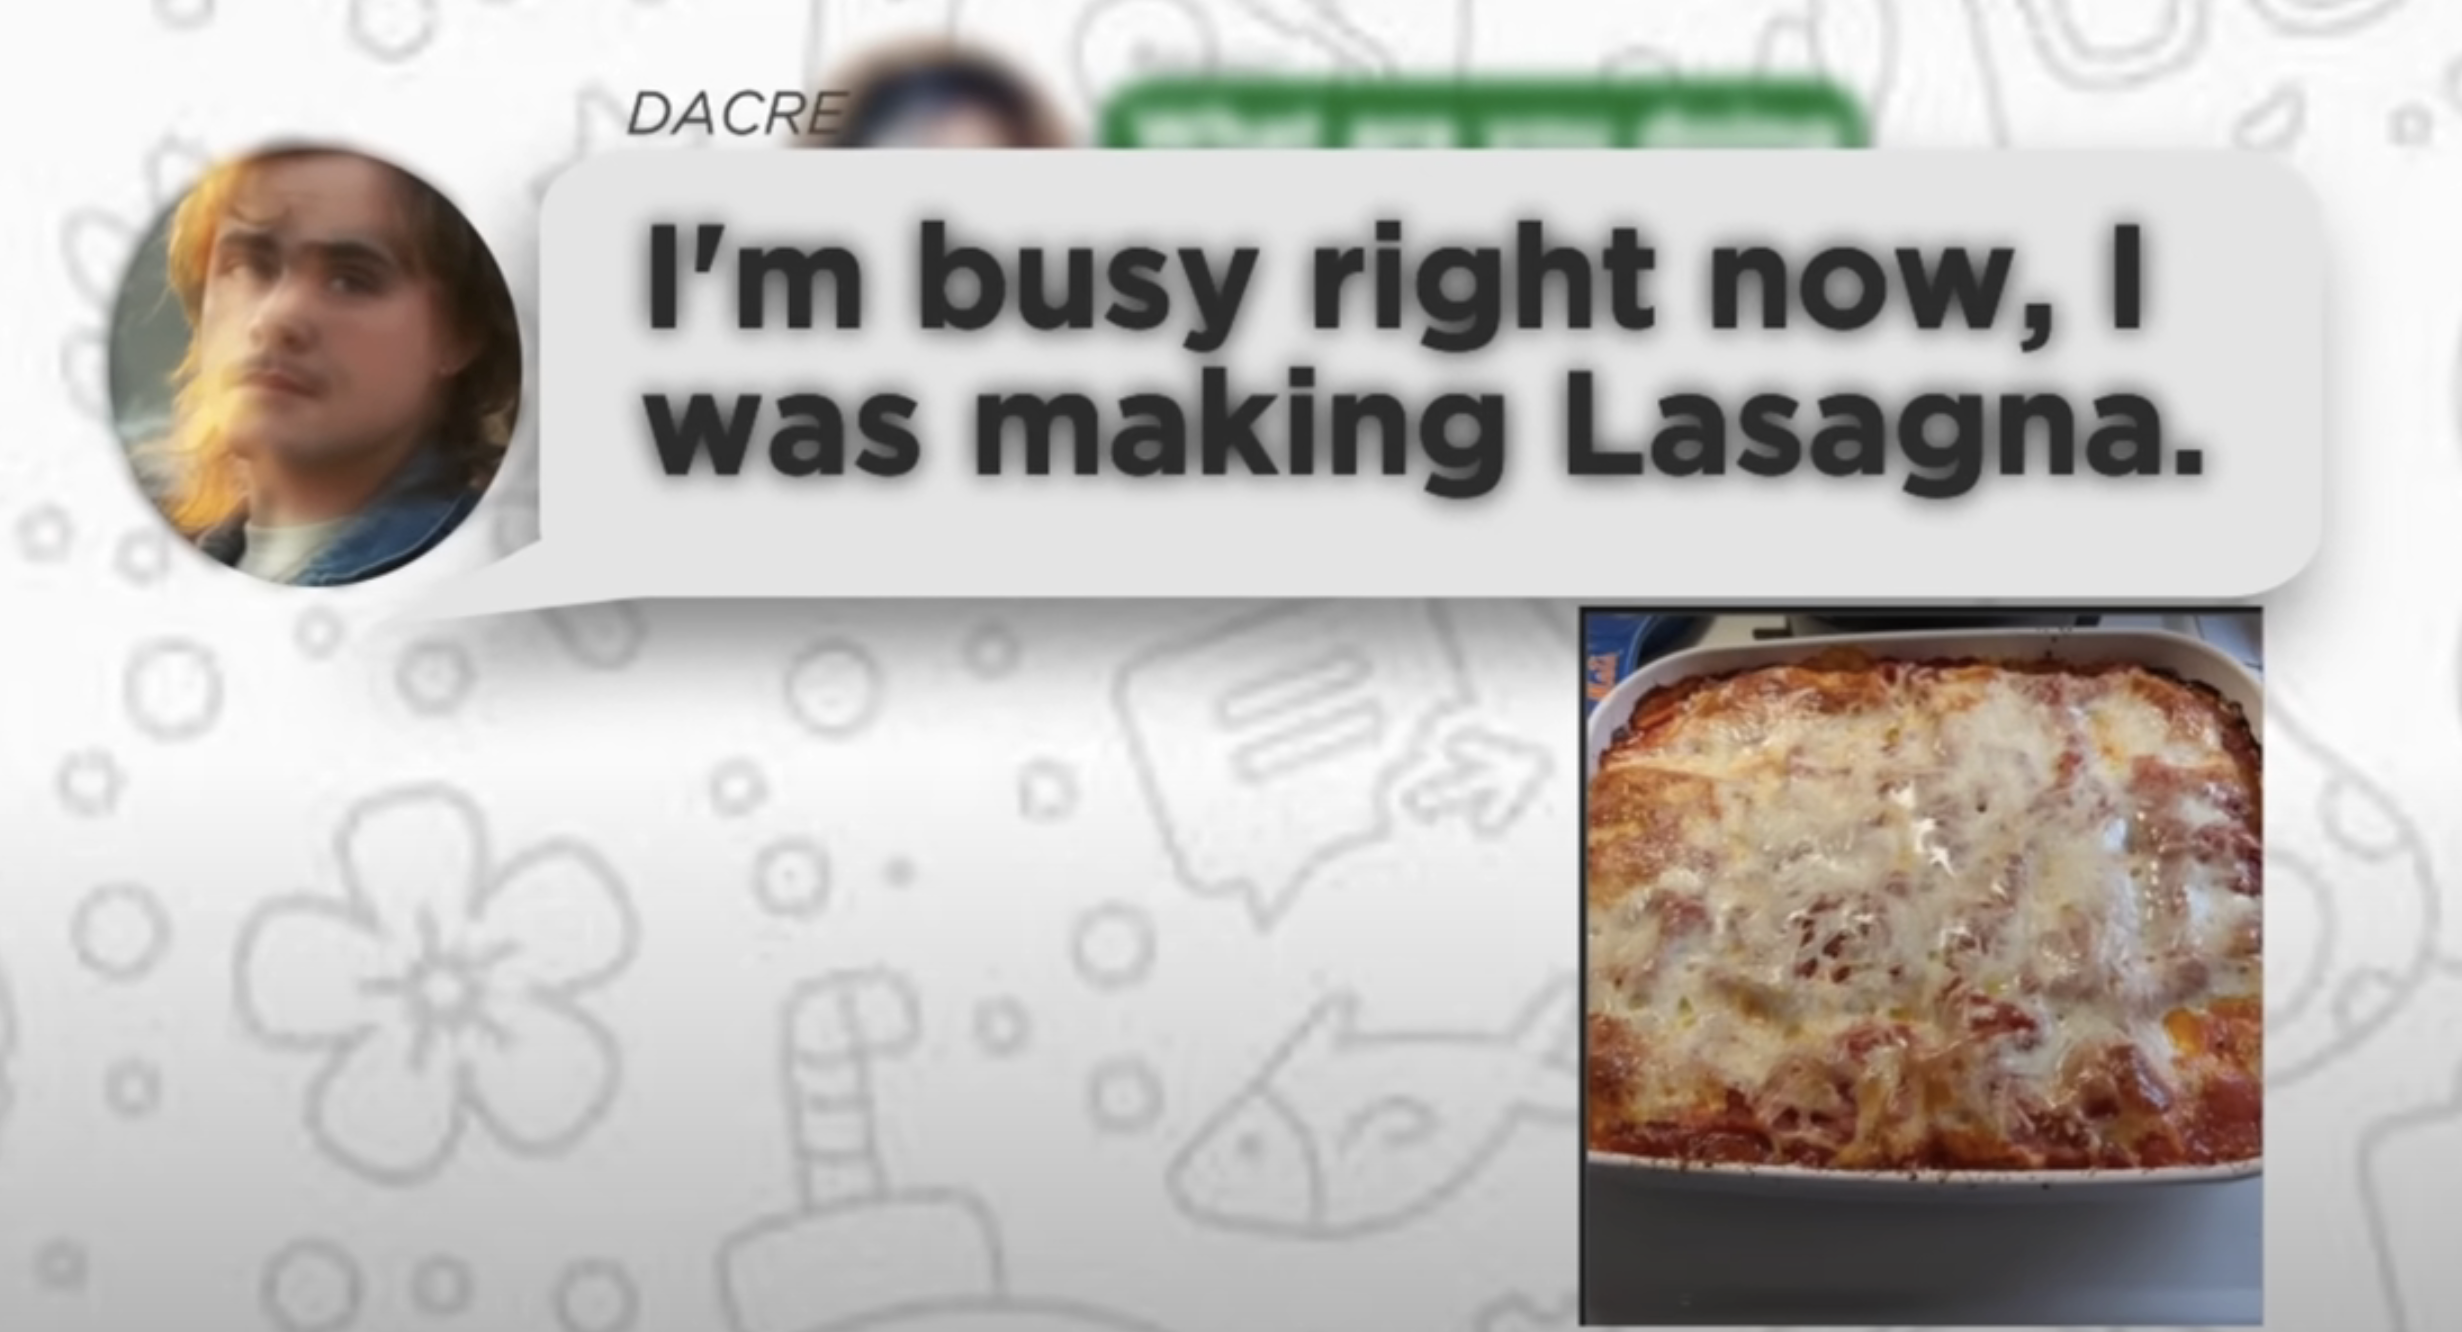 &quot;I&#x27;m busy right now, I was making Lasagna&quot; with photo of lasagna